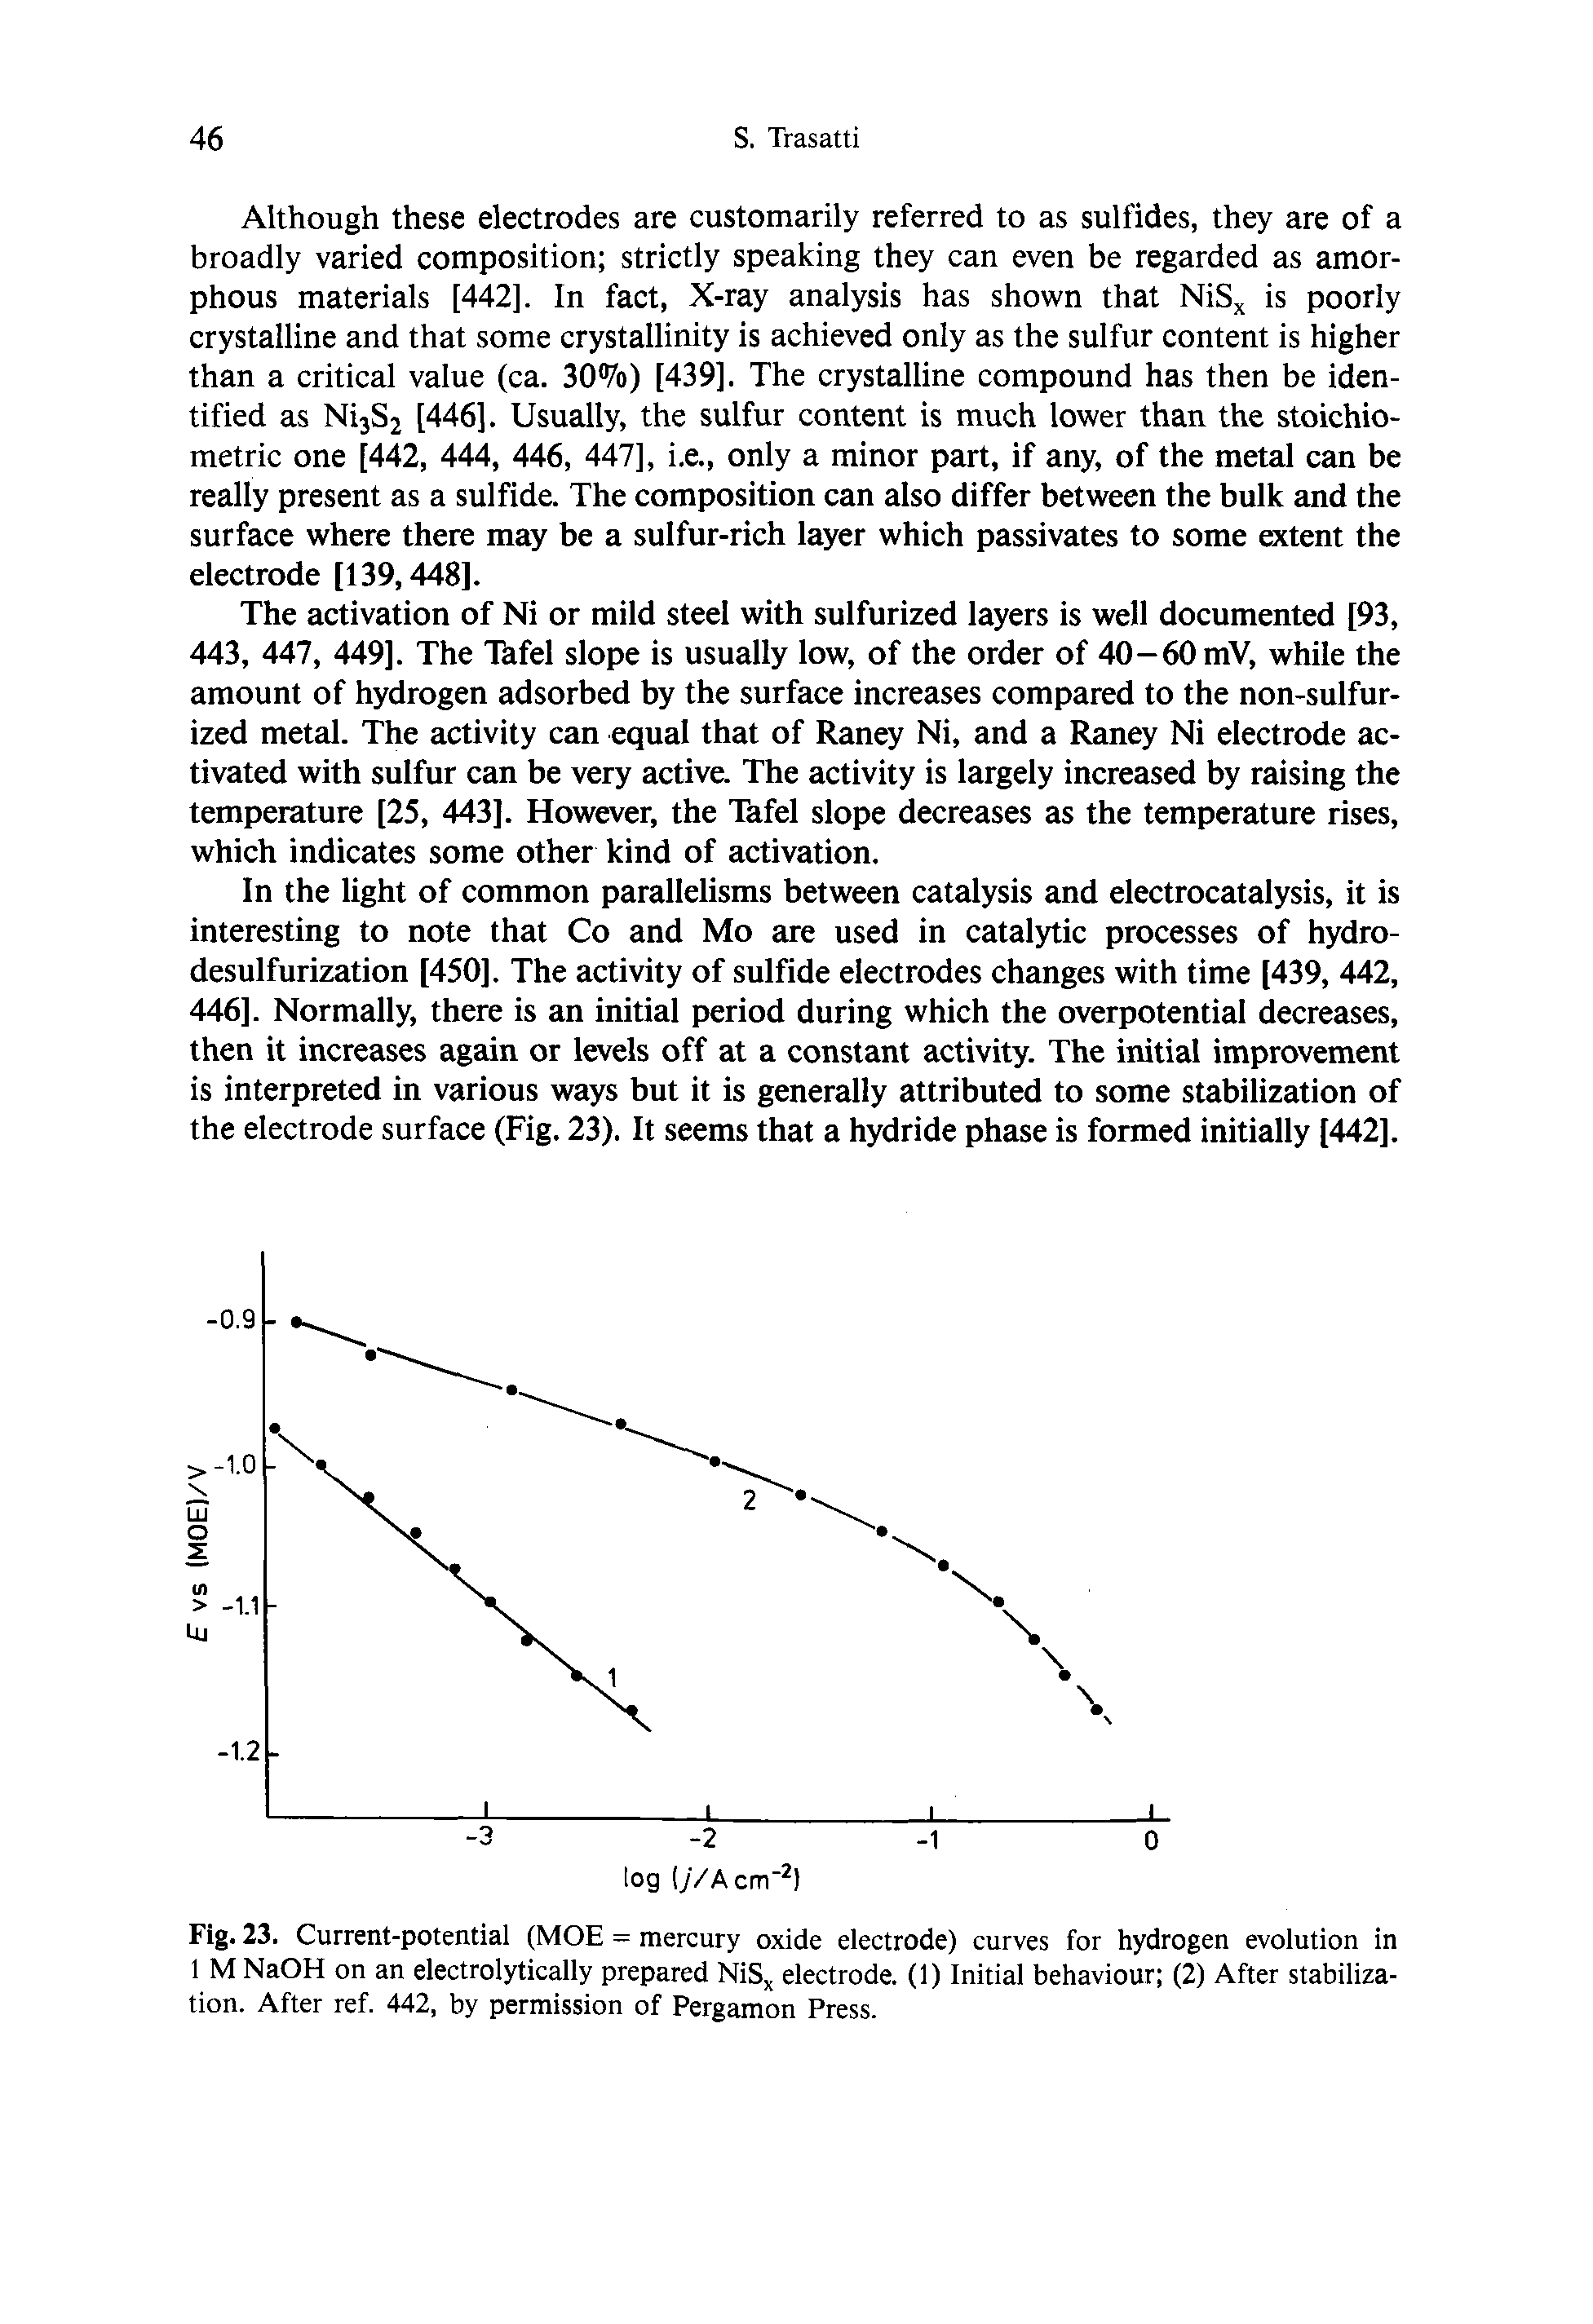 Fig. 23. Current-potential (MOE = mercury oxide electrode) curves for hydrogen evolution in 1 M NaOH on an electrolytically prepared NiSx electrode. (1) Initial behaviour (2) After stabilization. After ref. 442, by permission of Pergamon Press.